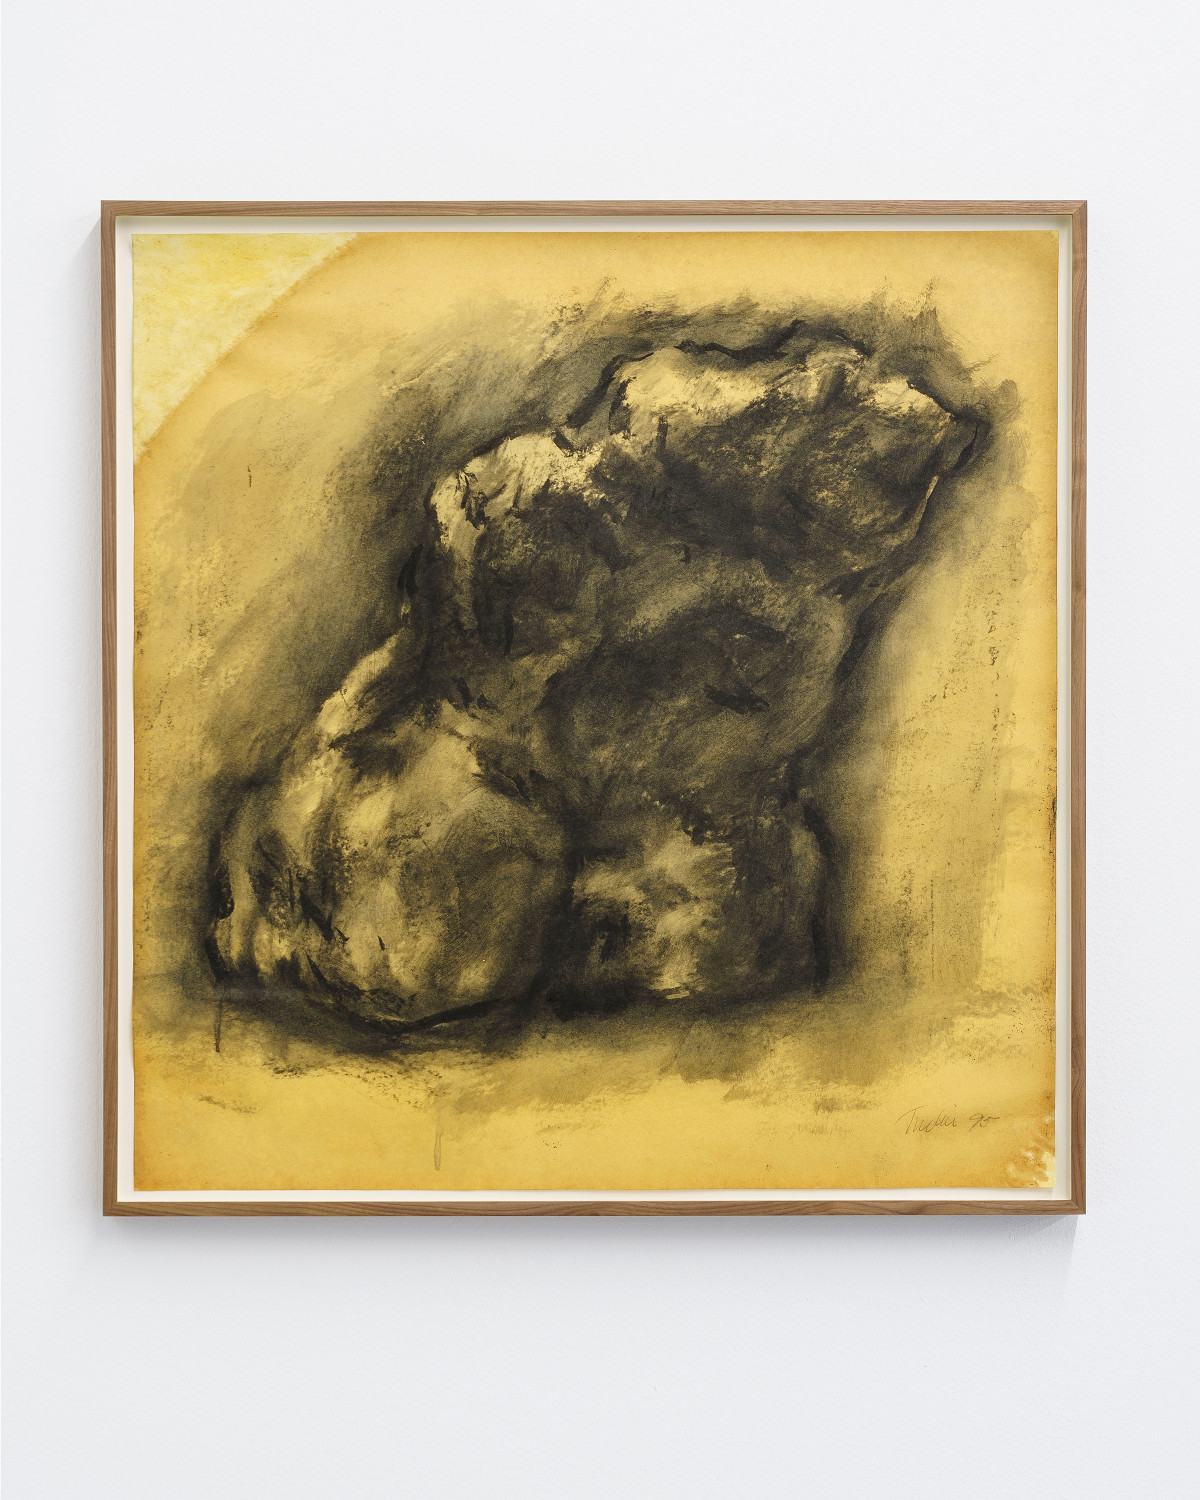 William Tucker, ‘Maia’, 1995, Charcoal on oiled paper